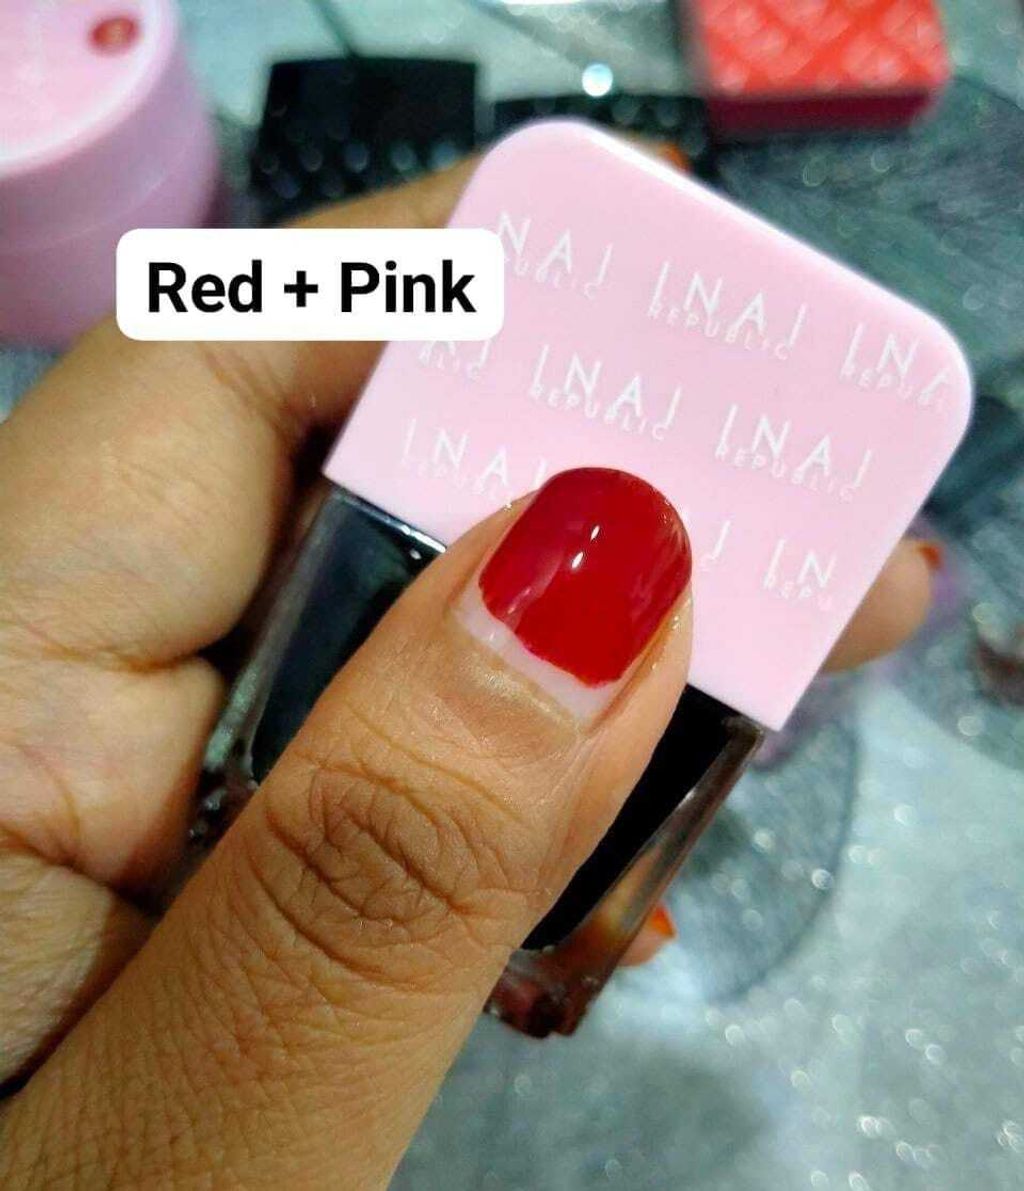 inai red pink